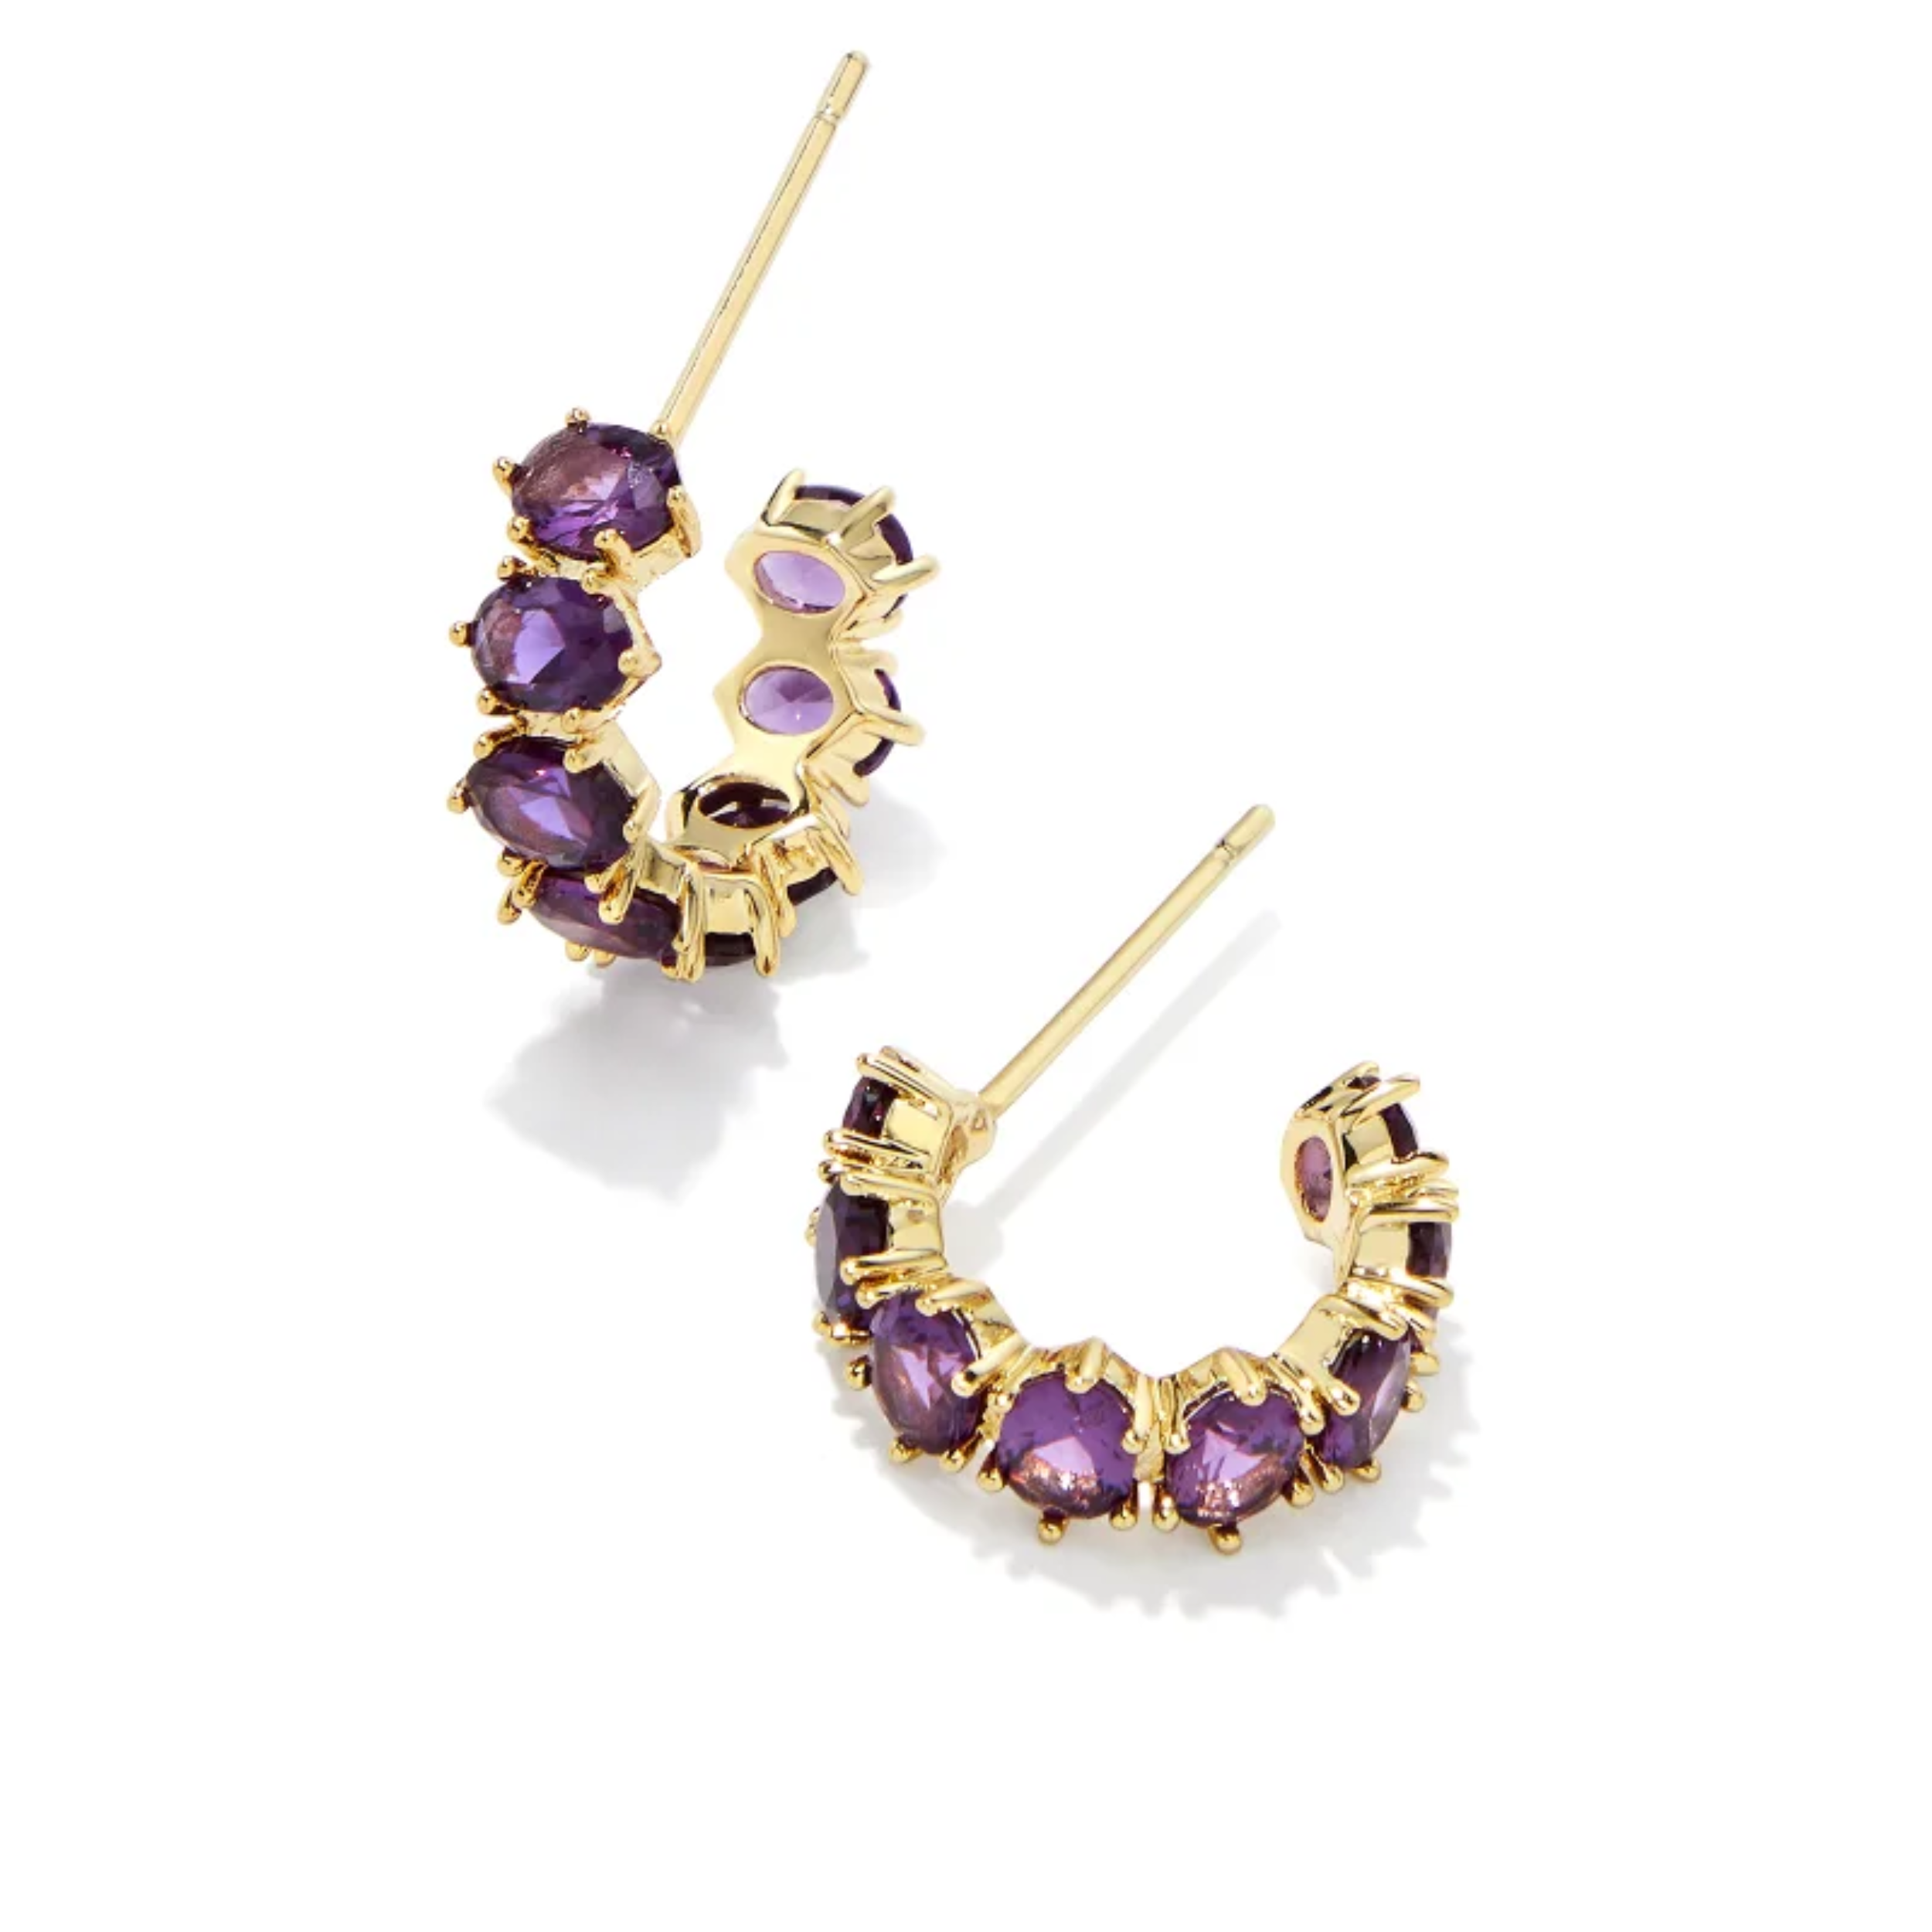 These Cailin Gold Crystal Huggie Earrings in Purple Crystal by Kendra Scott are pictured on a white background.